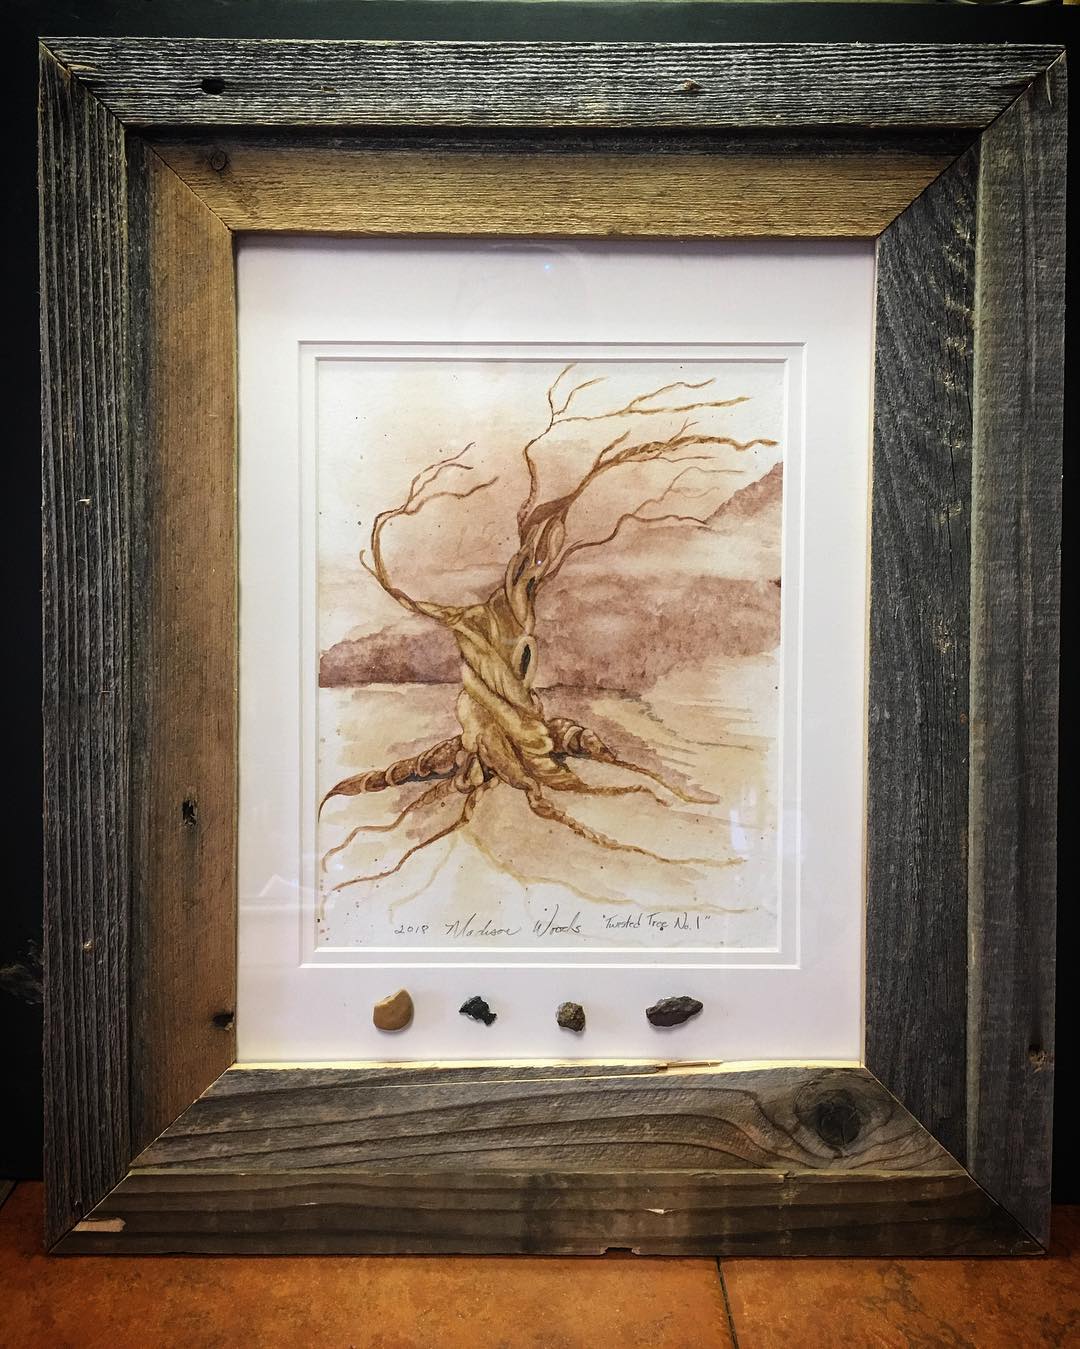 Not a monochrome, but a twisted tree framed with rock pigment samples.